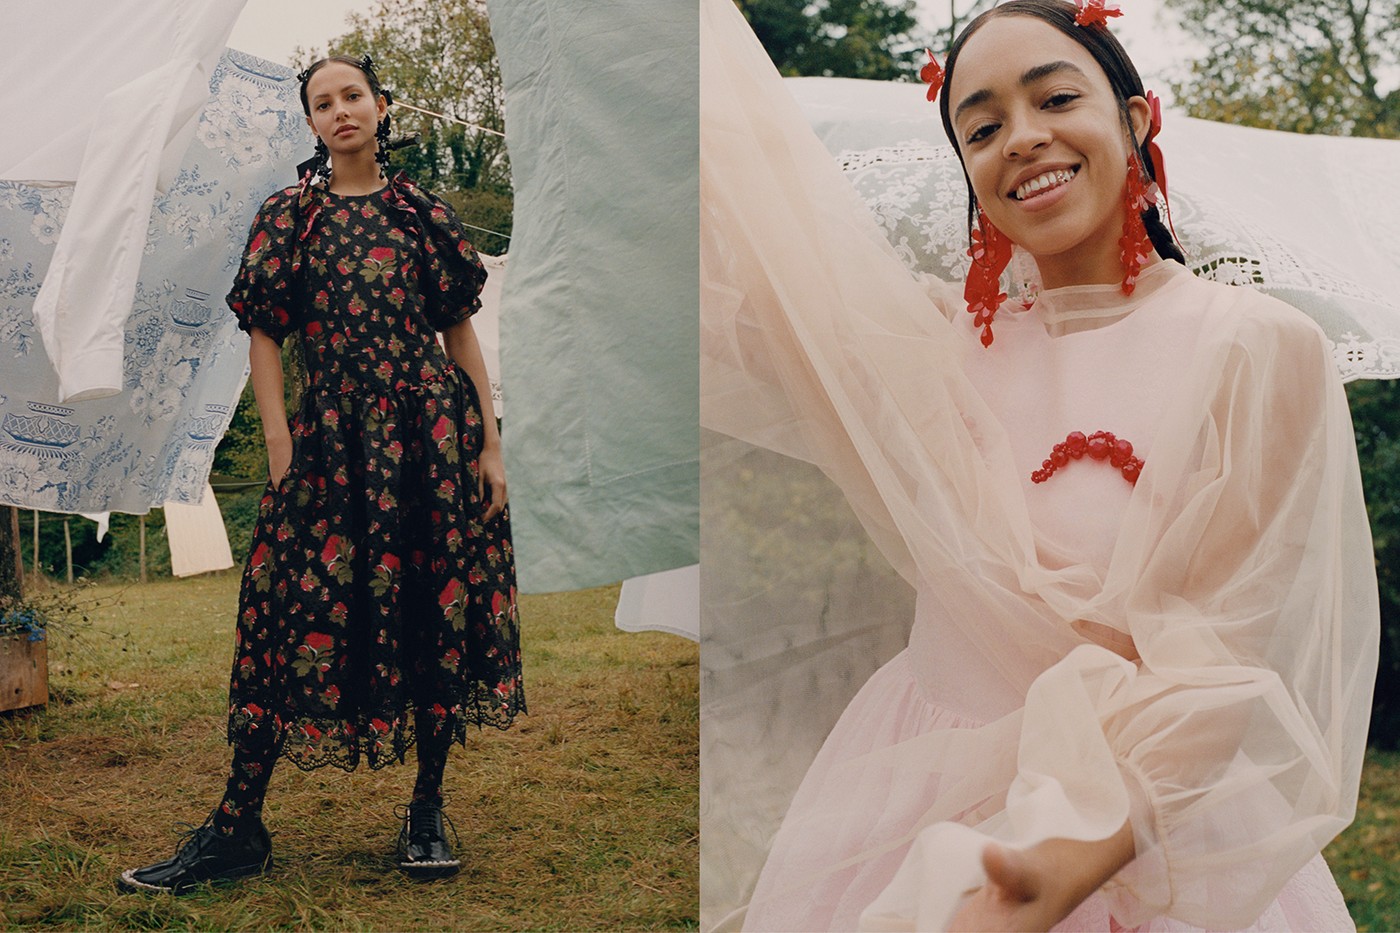 H&m X Simone Rocha Is 2021's Most Exciting Collaboration